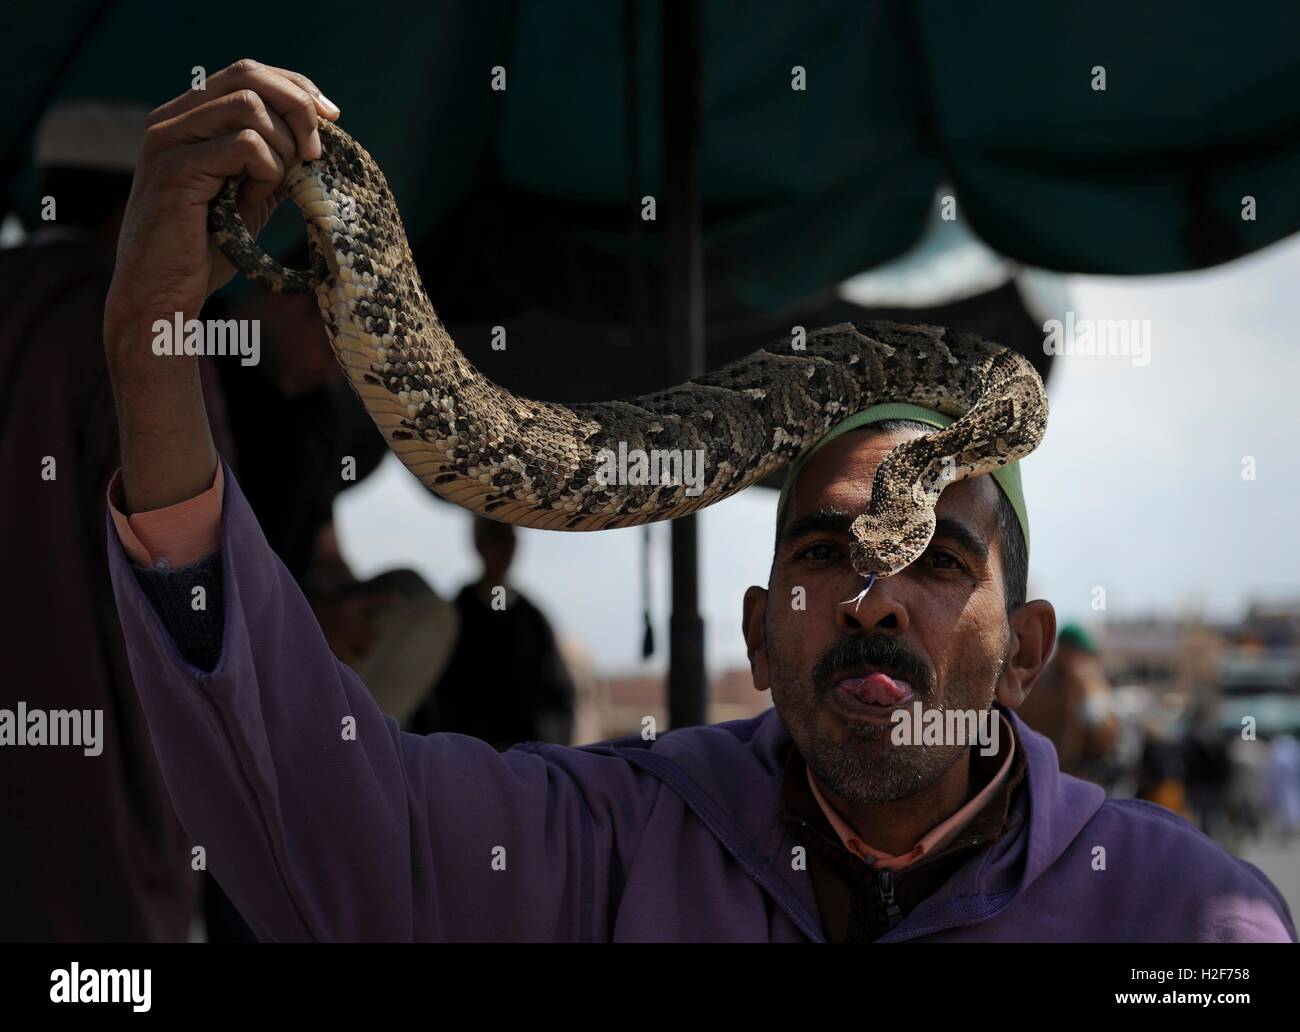 A Moroccan snake charmer kisses a snake at the Jemaa el Fna market square April 3, 2012 in Marrekech, Morocco. Stock Photo